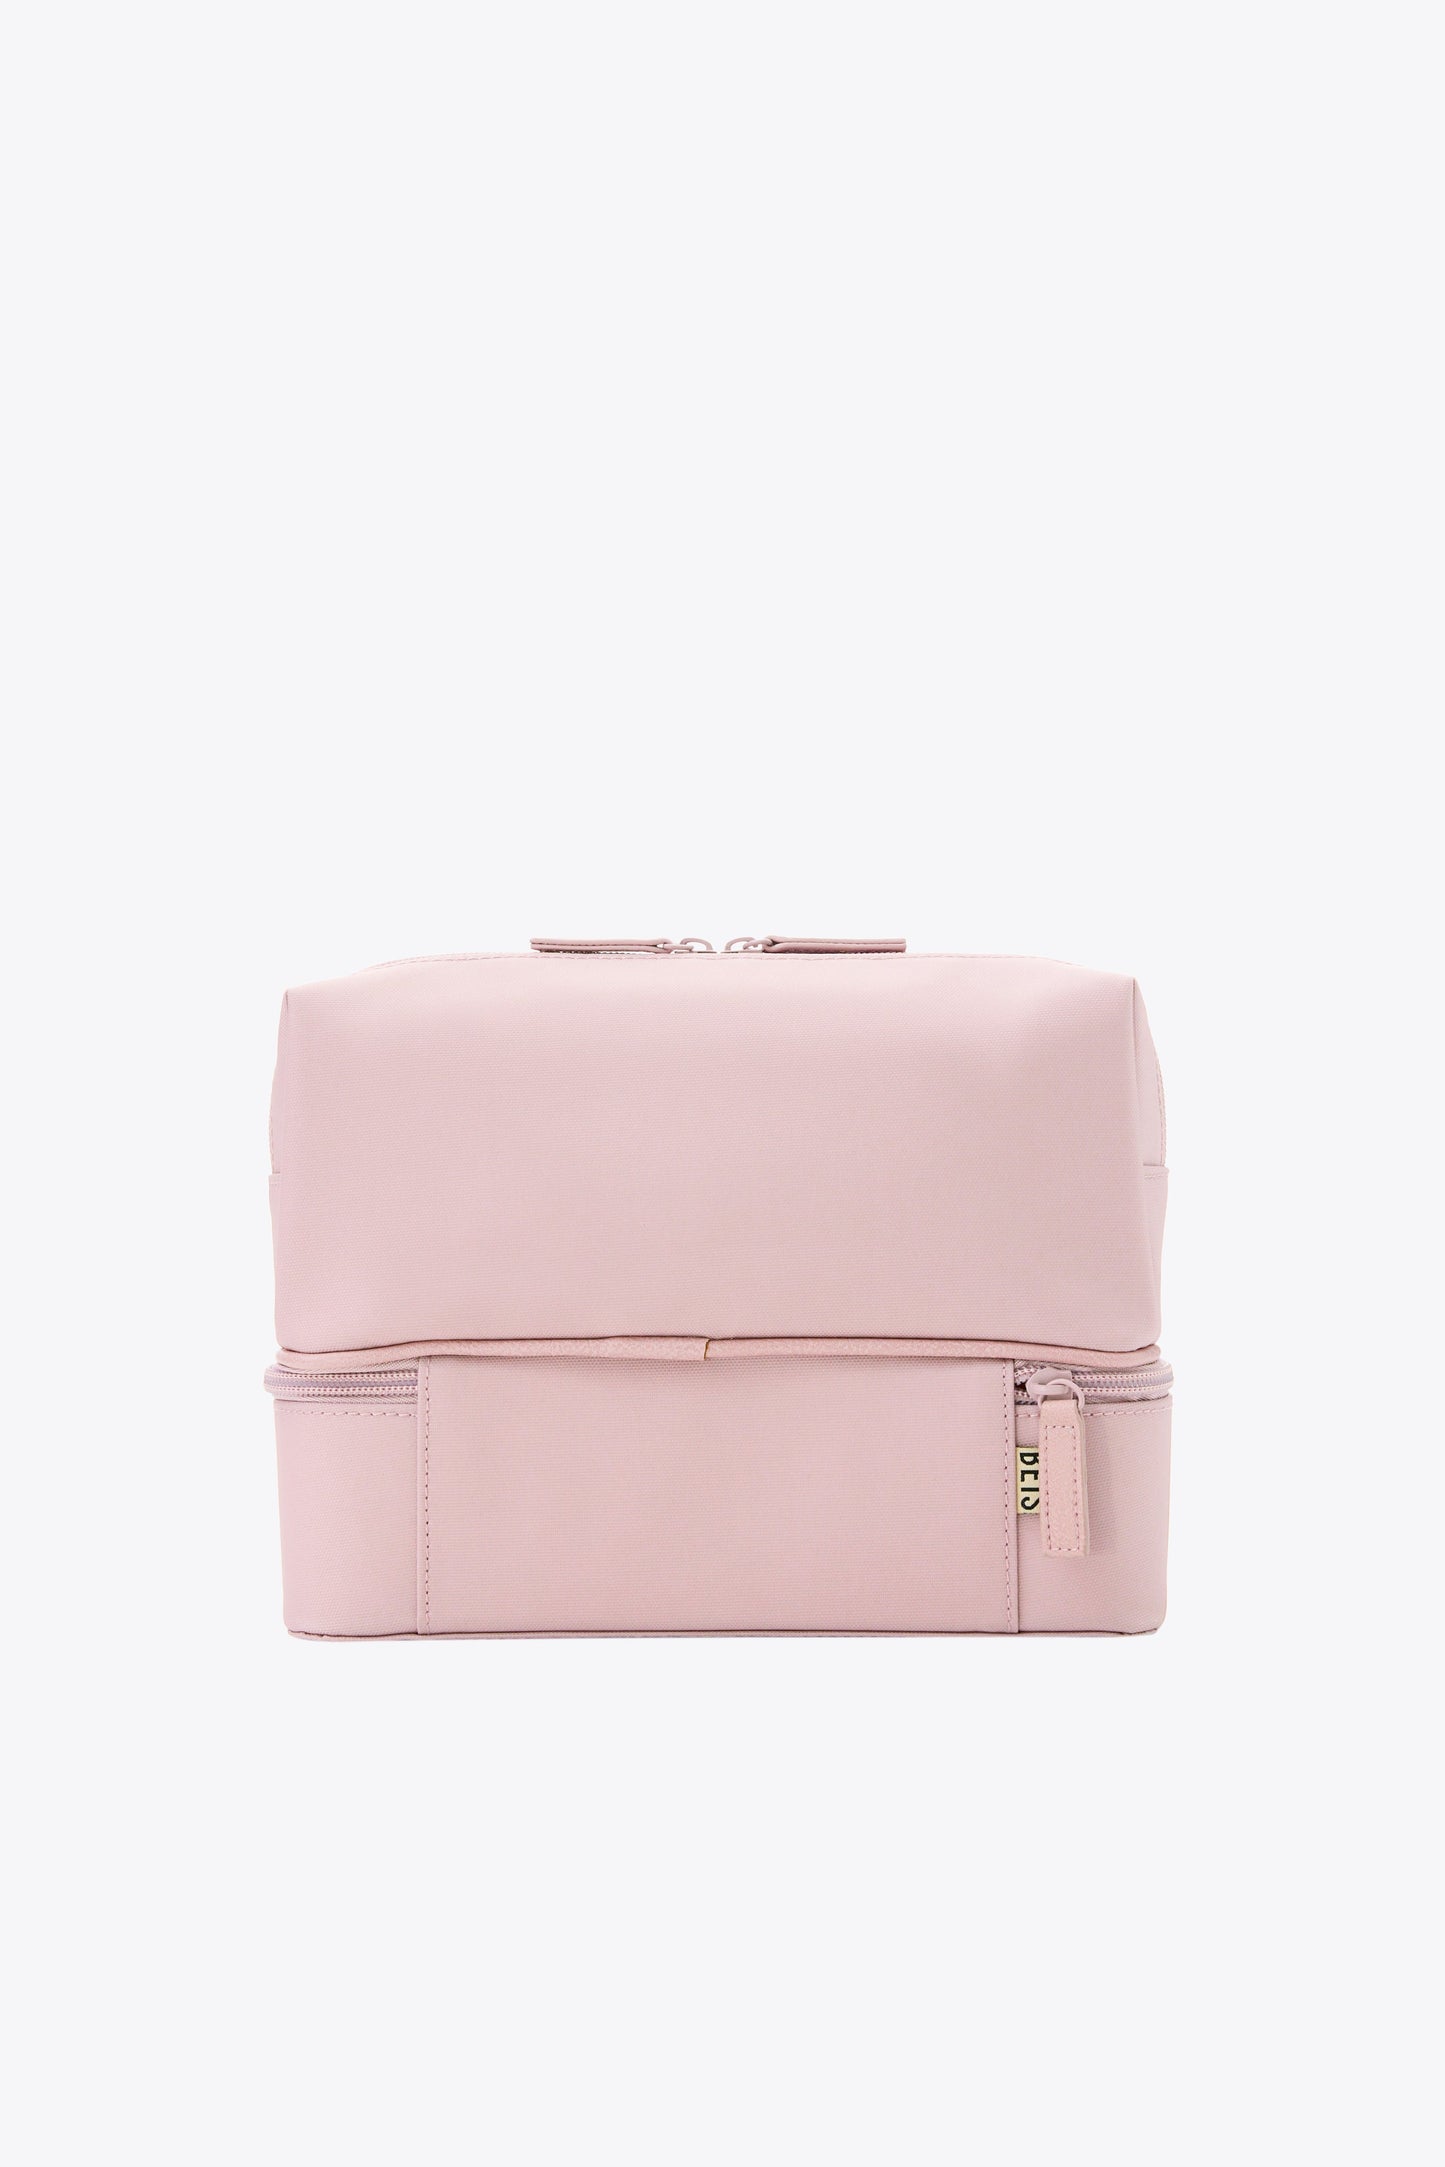 The Cosmetic Organizer in Atlas Pink